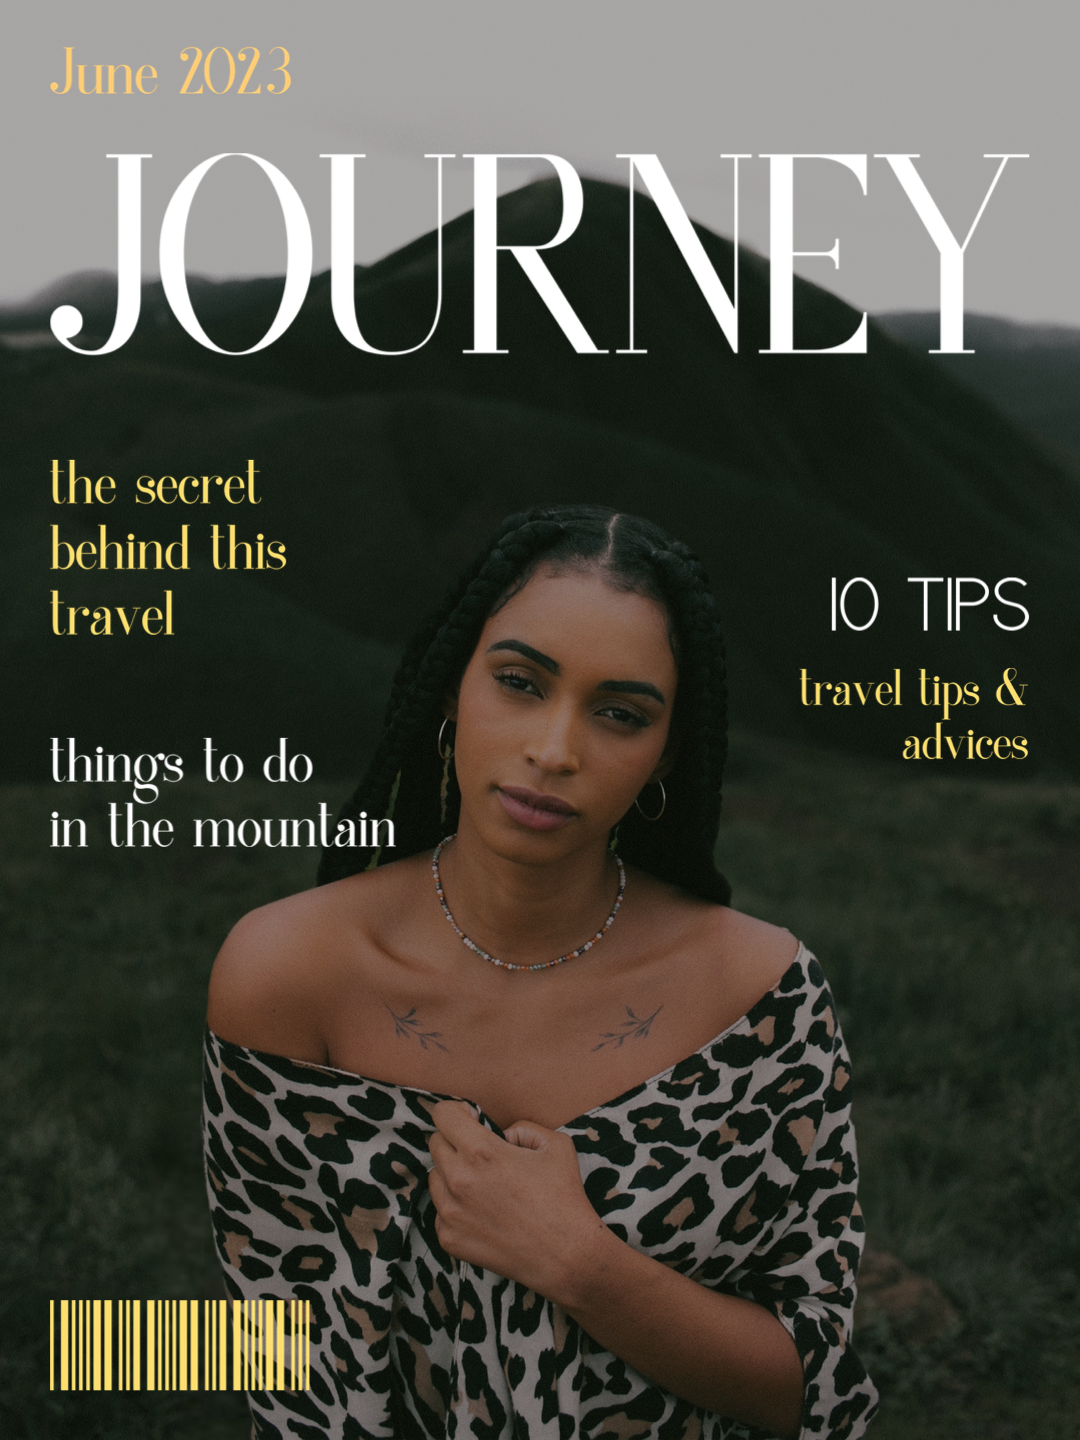 Journey Cover Magazine Woman With Long Hair secret Of Travel